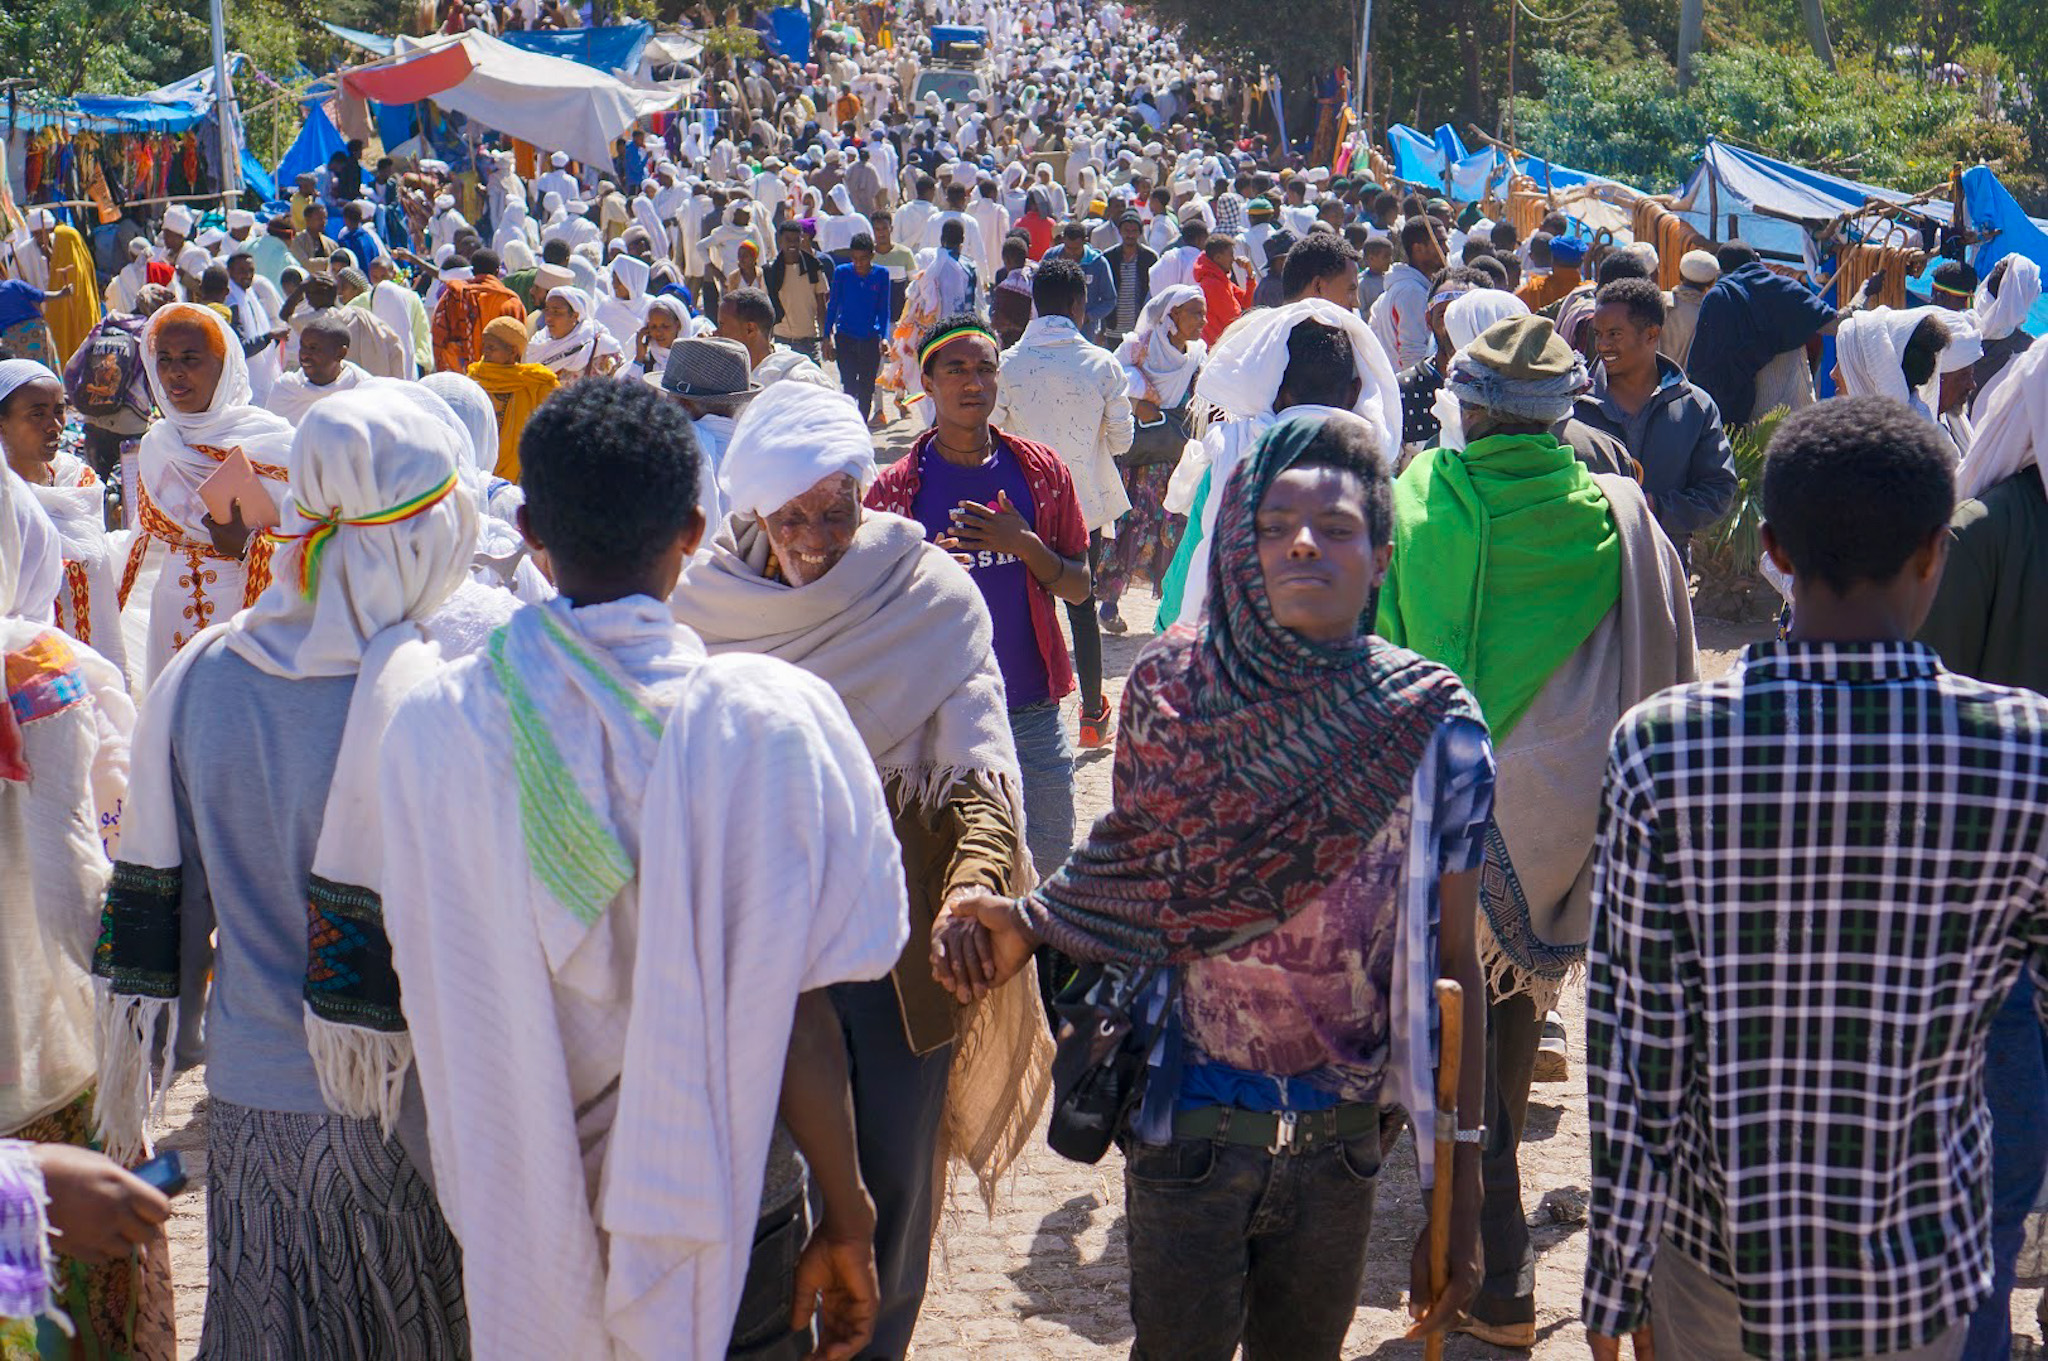 The Amazing Race from Bahir Dar to Christmas in Lalibela